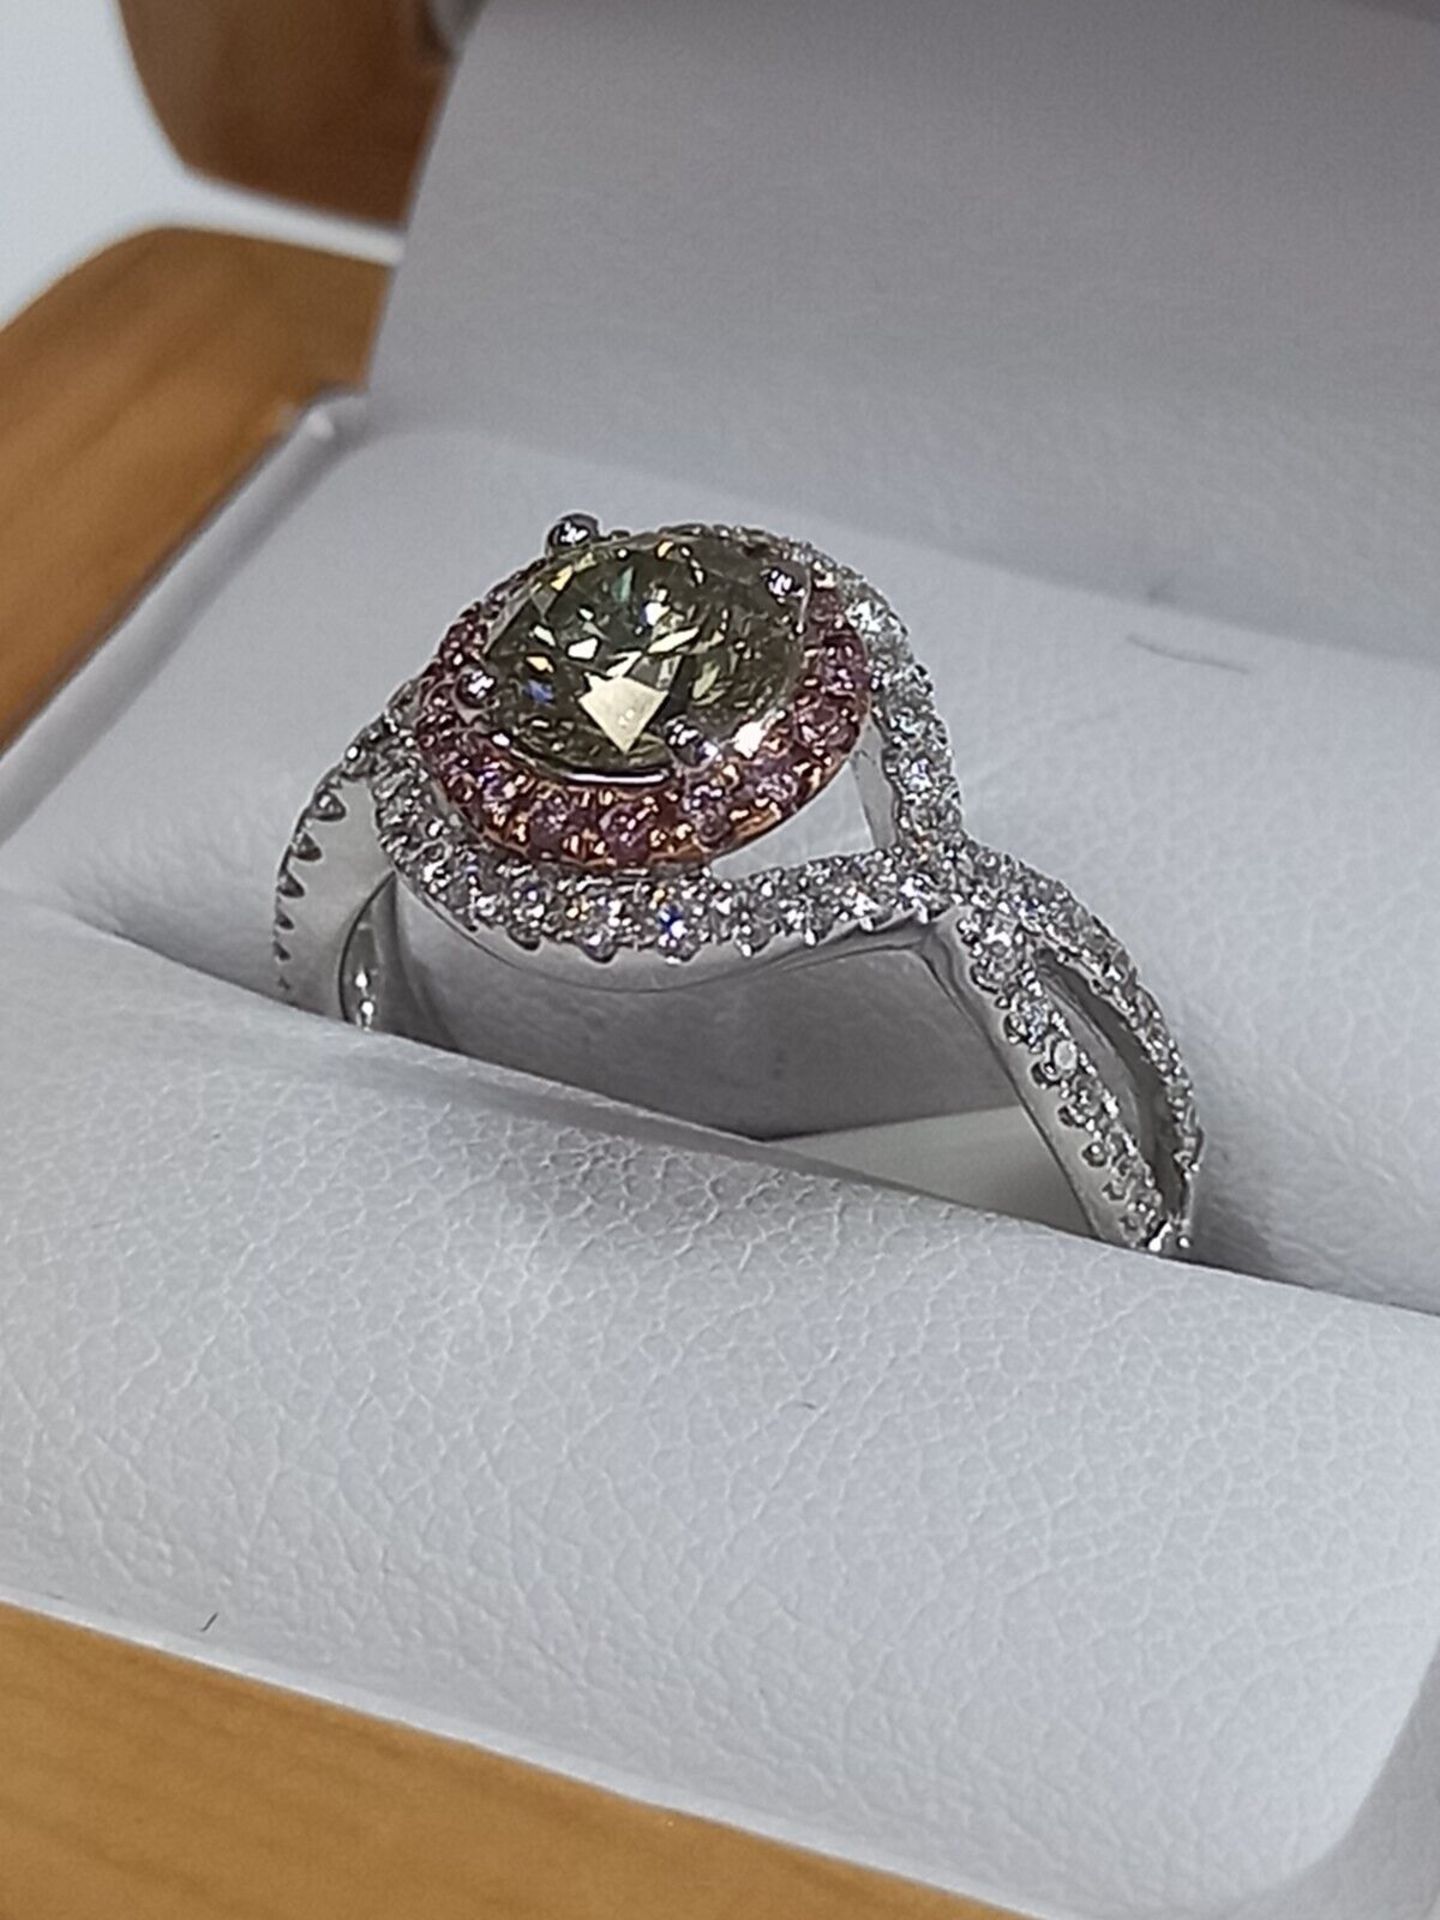 EXQUSITE 1.36CT GREEN/PINK/WHITE DIAMOND HALLO SET ENGAGEMENT RING + VALUATION CERT OF £12995 - Image 6 of 9